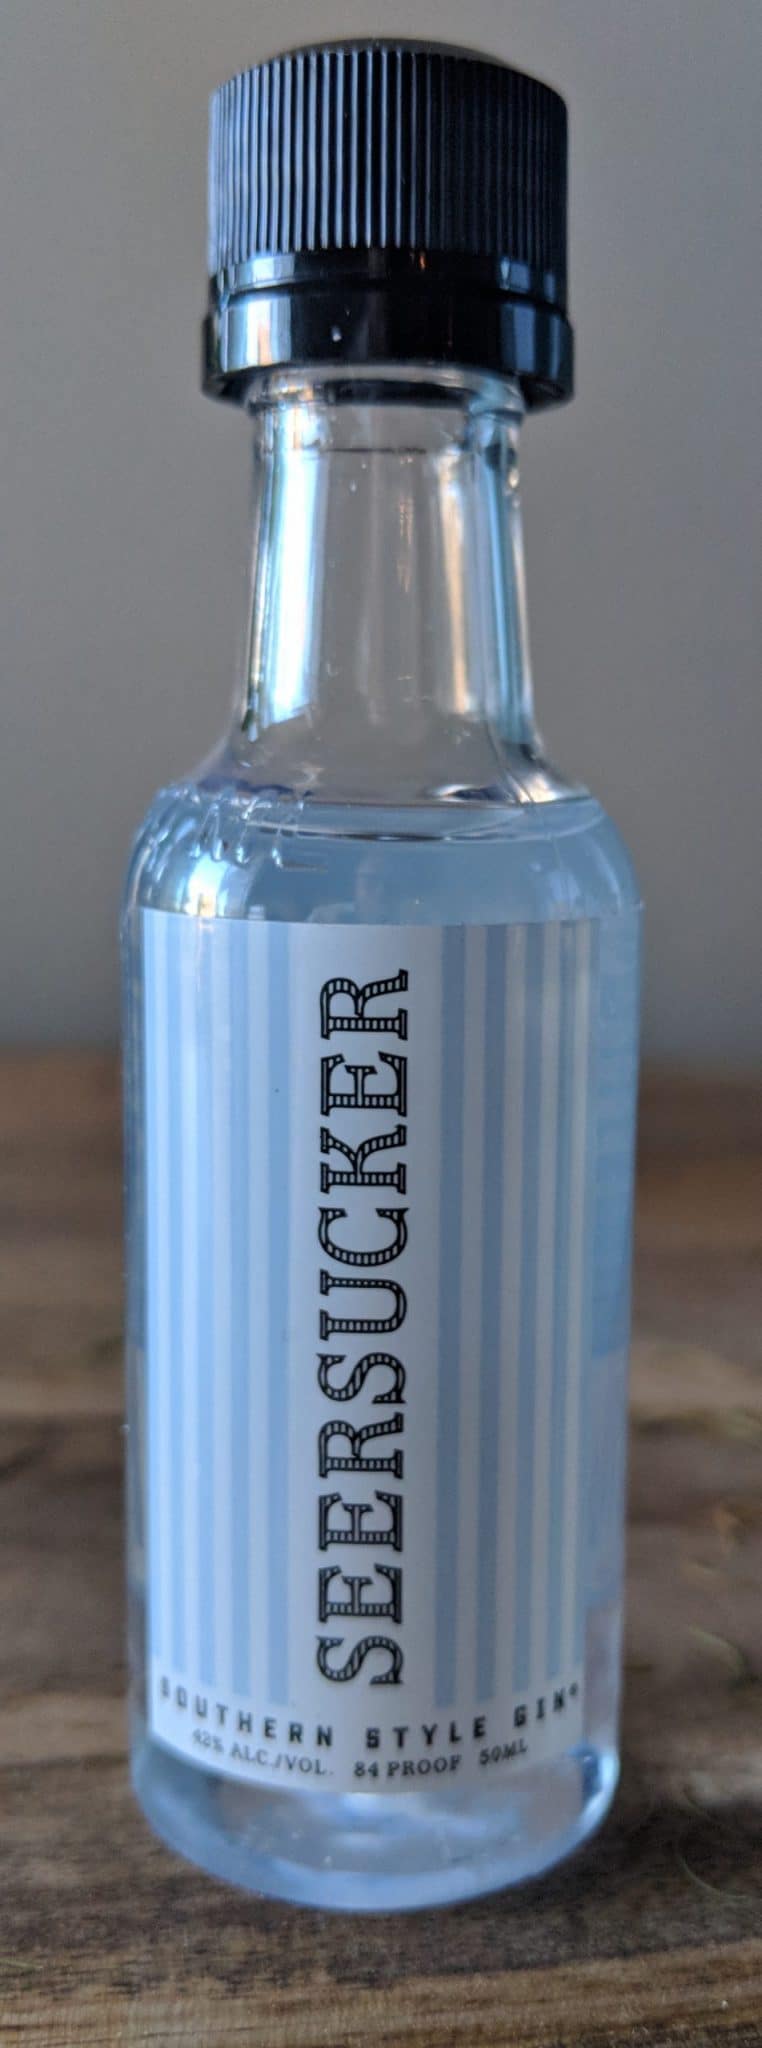 Seersucker Gin | Expert Gin Review and Tasting Notes